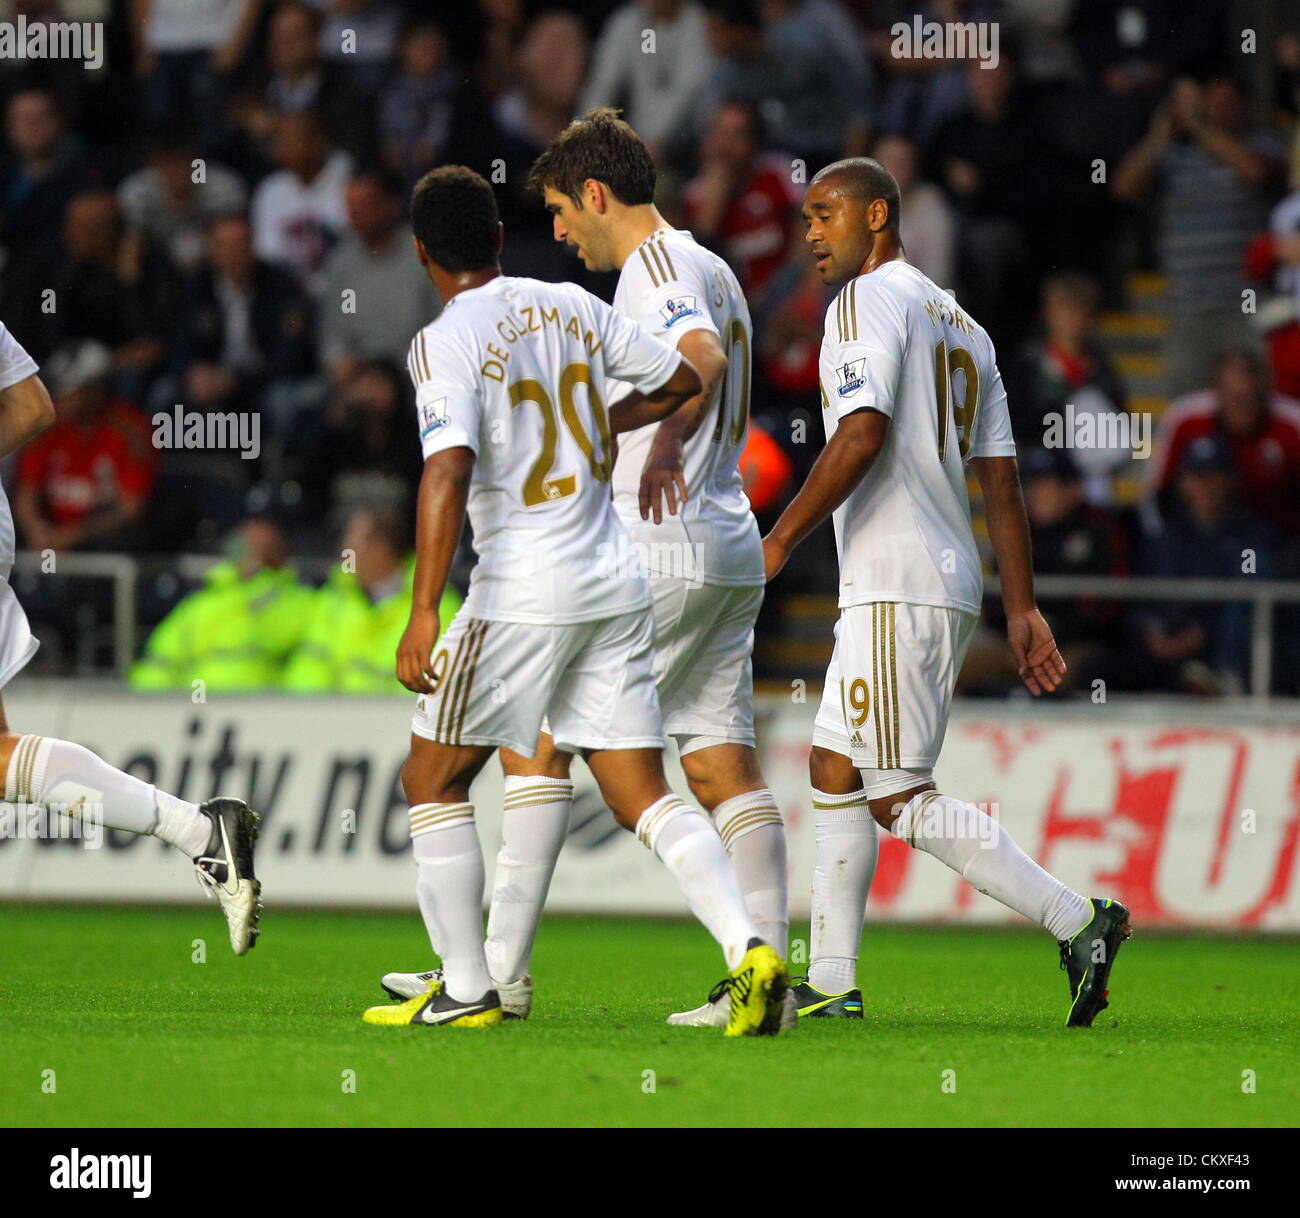 Liberty Stadium, Swansea, UK. 28th Aug 2012.   Pictured: Danny Graham of Swansea (C) with team mates Jonathan de Guzman (L) and Luke Moore (R) after his opening goal. Capital One Cup game, Swansea City FC v Barnsley at the Liberty Stadium, south Wales, UK. Credit:  D Legakis / Alamy Live News Stock Photo